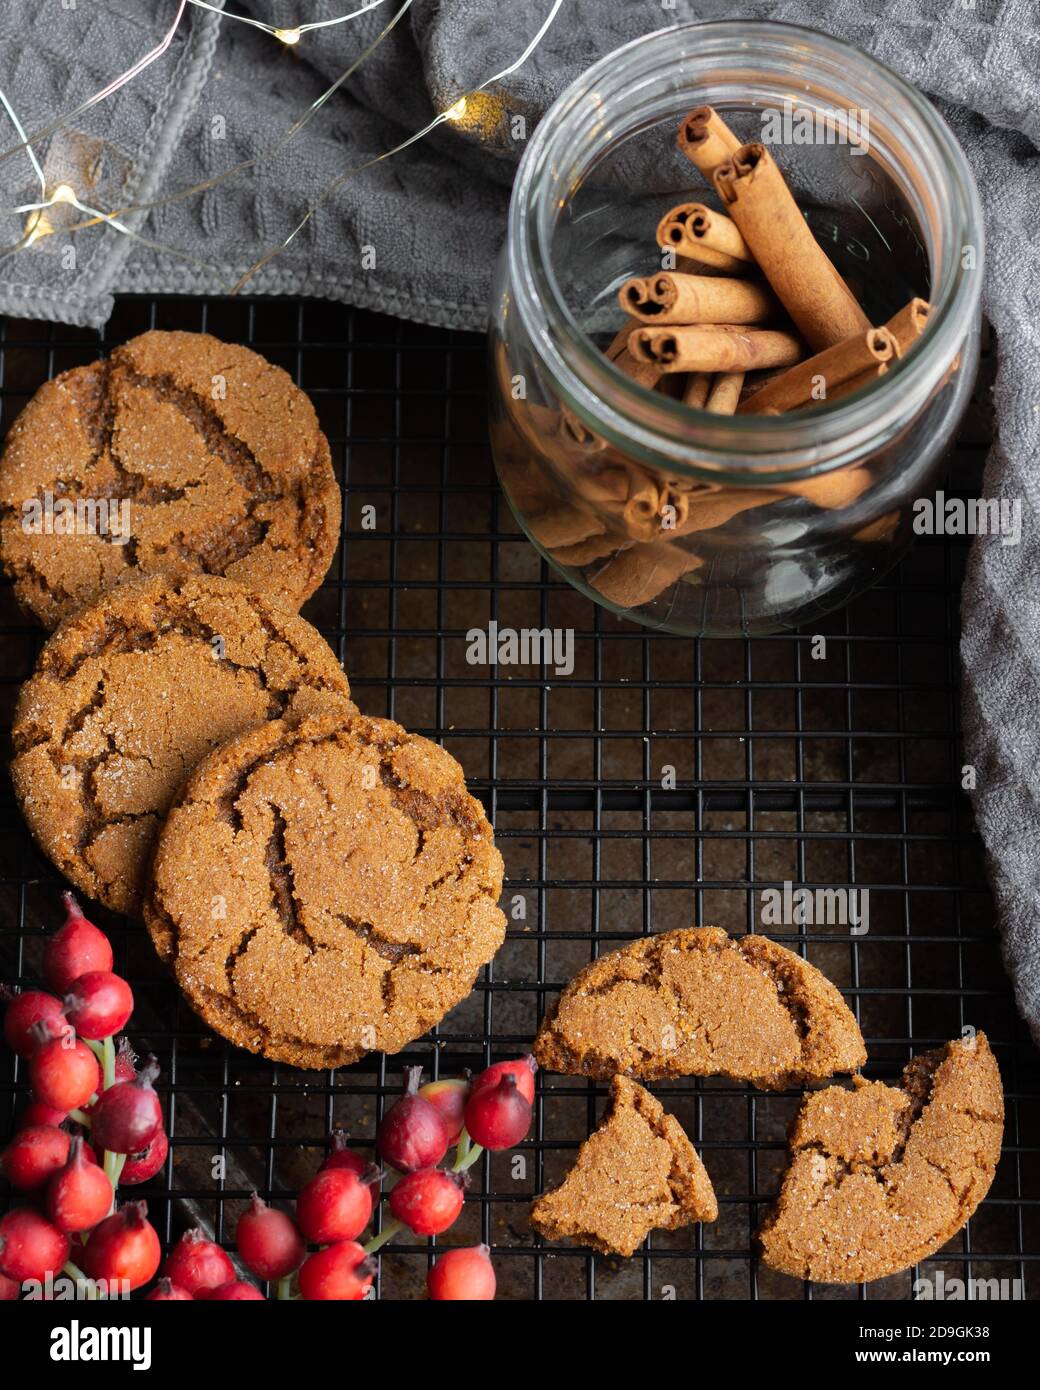 Ginger snap cookies with holiday lights, berries and cinnamon sticks for Christmas Stock Photo